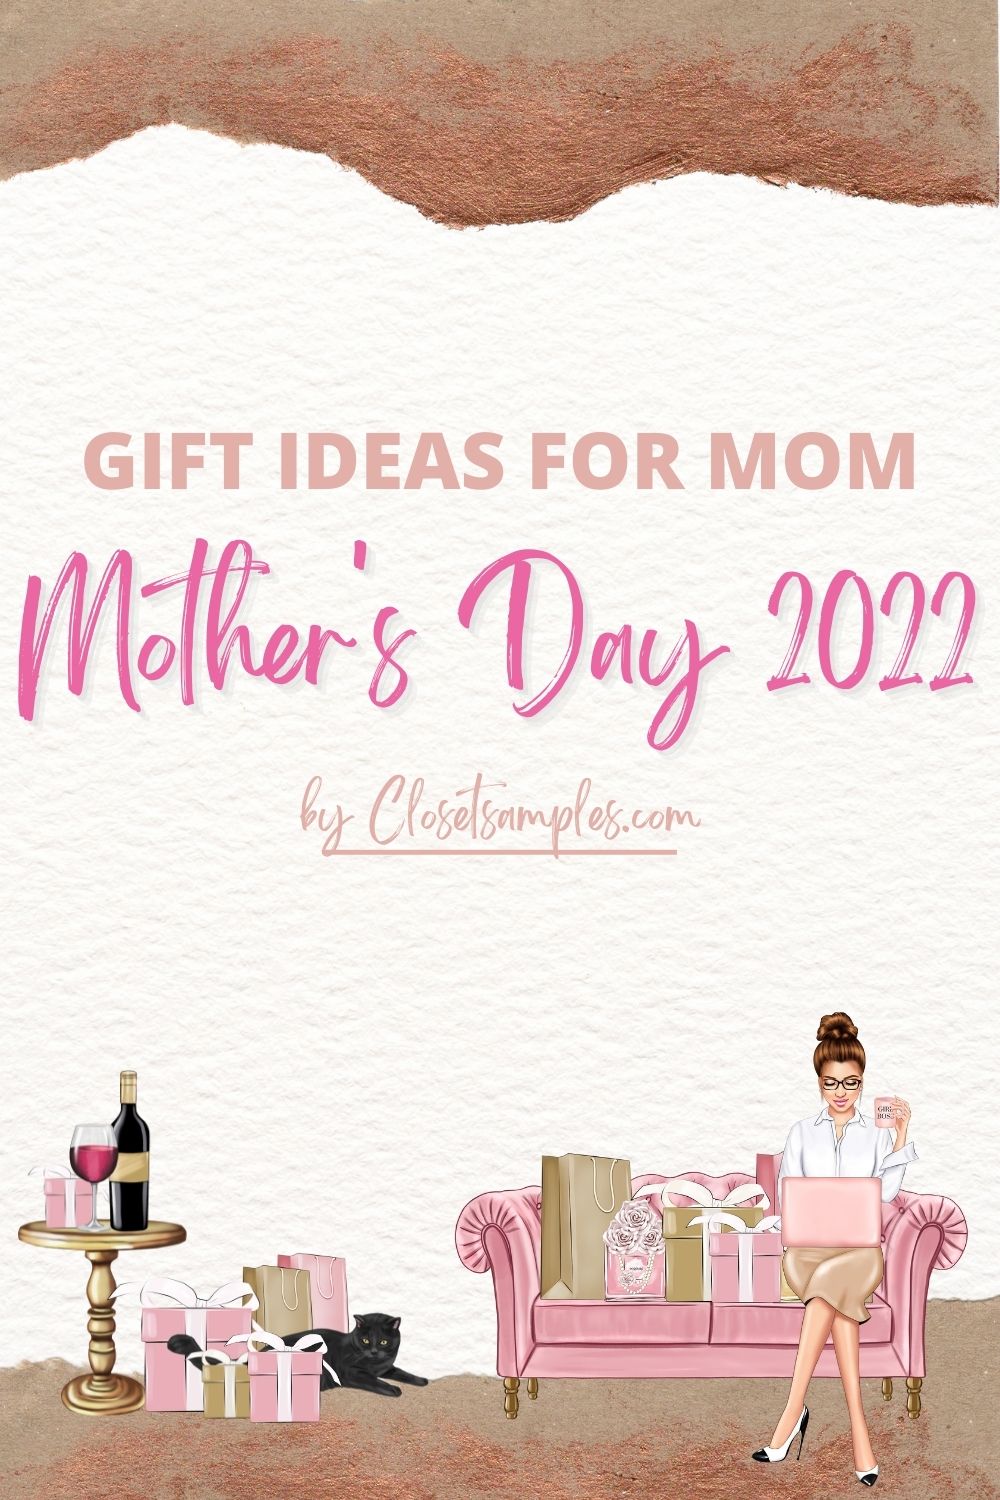 Gifts Ideas fo Mom for Mothers Day 2022 gift guide closetsamples Pinterest